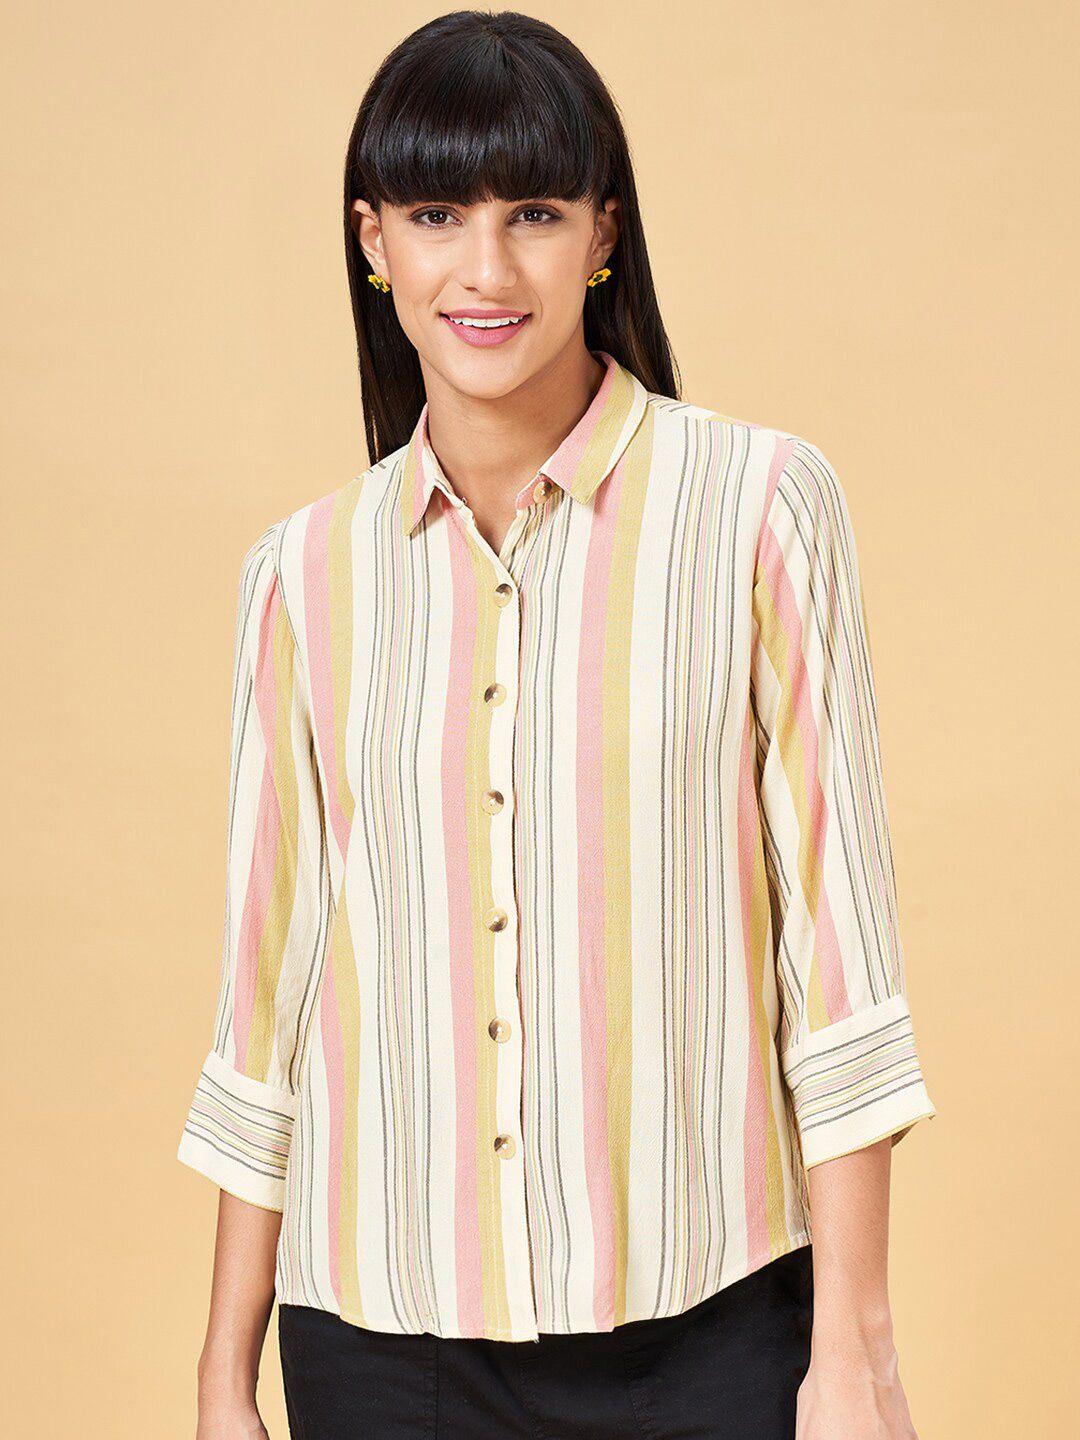 honey by pantaloons multi striped spread collar casual shirt